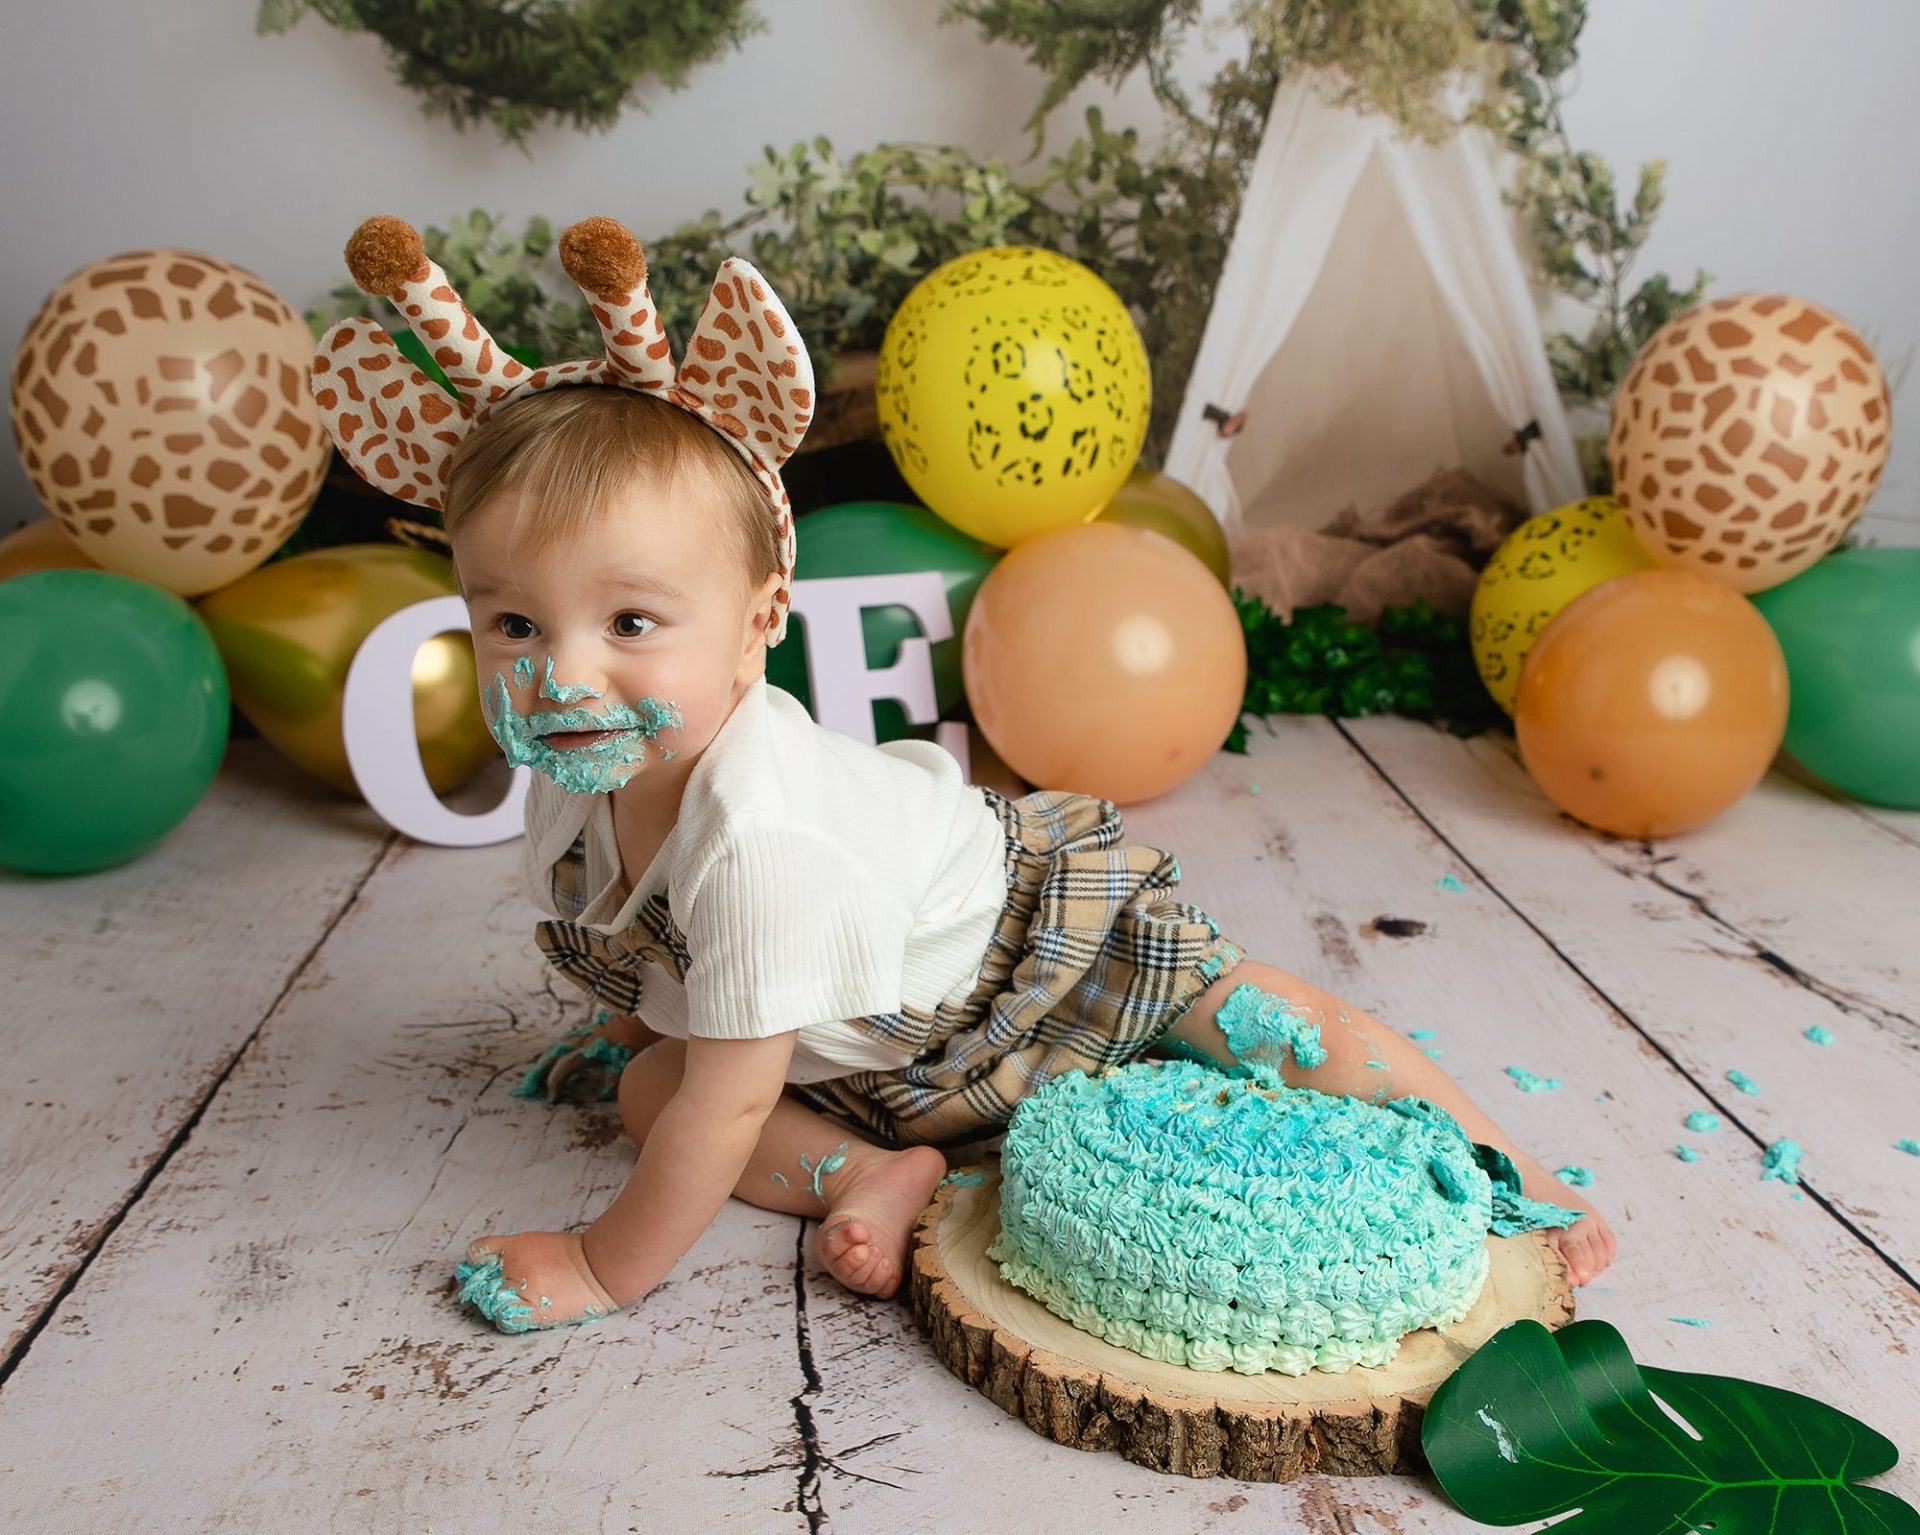 cake smash photographer in perth and kinross, cake smash photoshoot perth, cake smash dundee